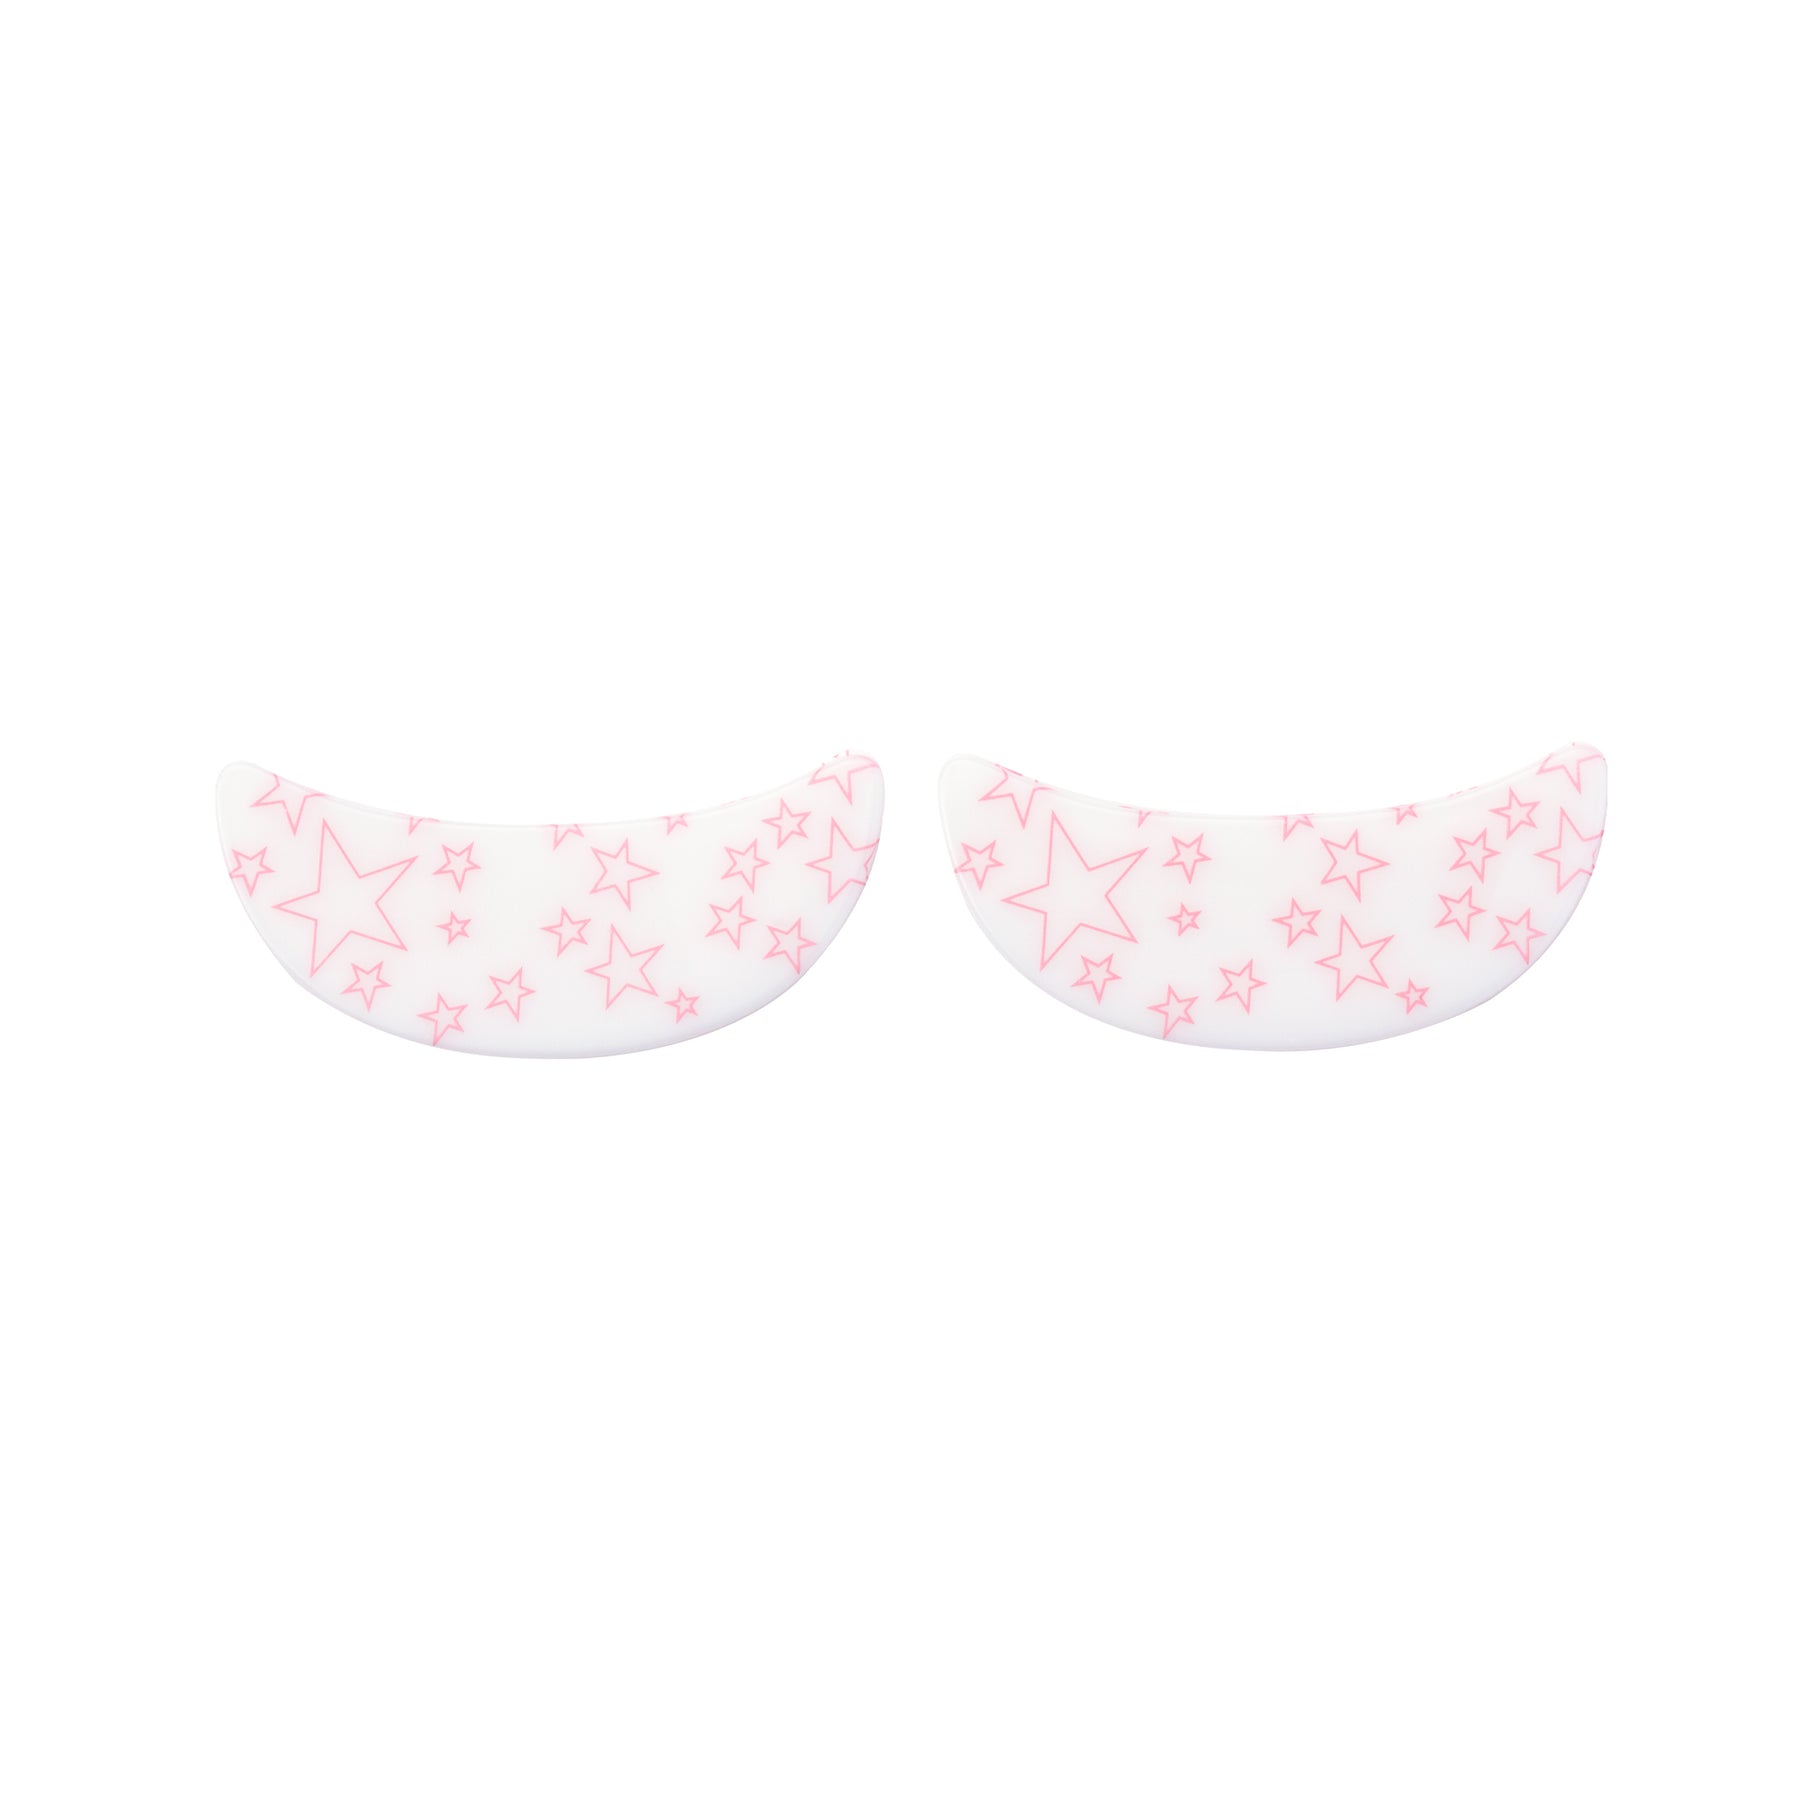 Reusable Masks Smile Line - Skin Care - Pacifica Beauty